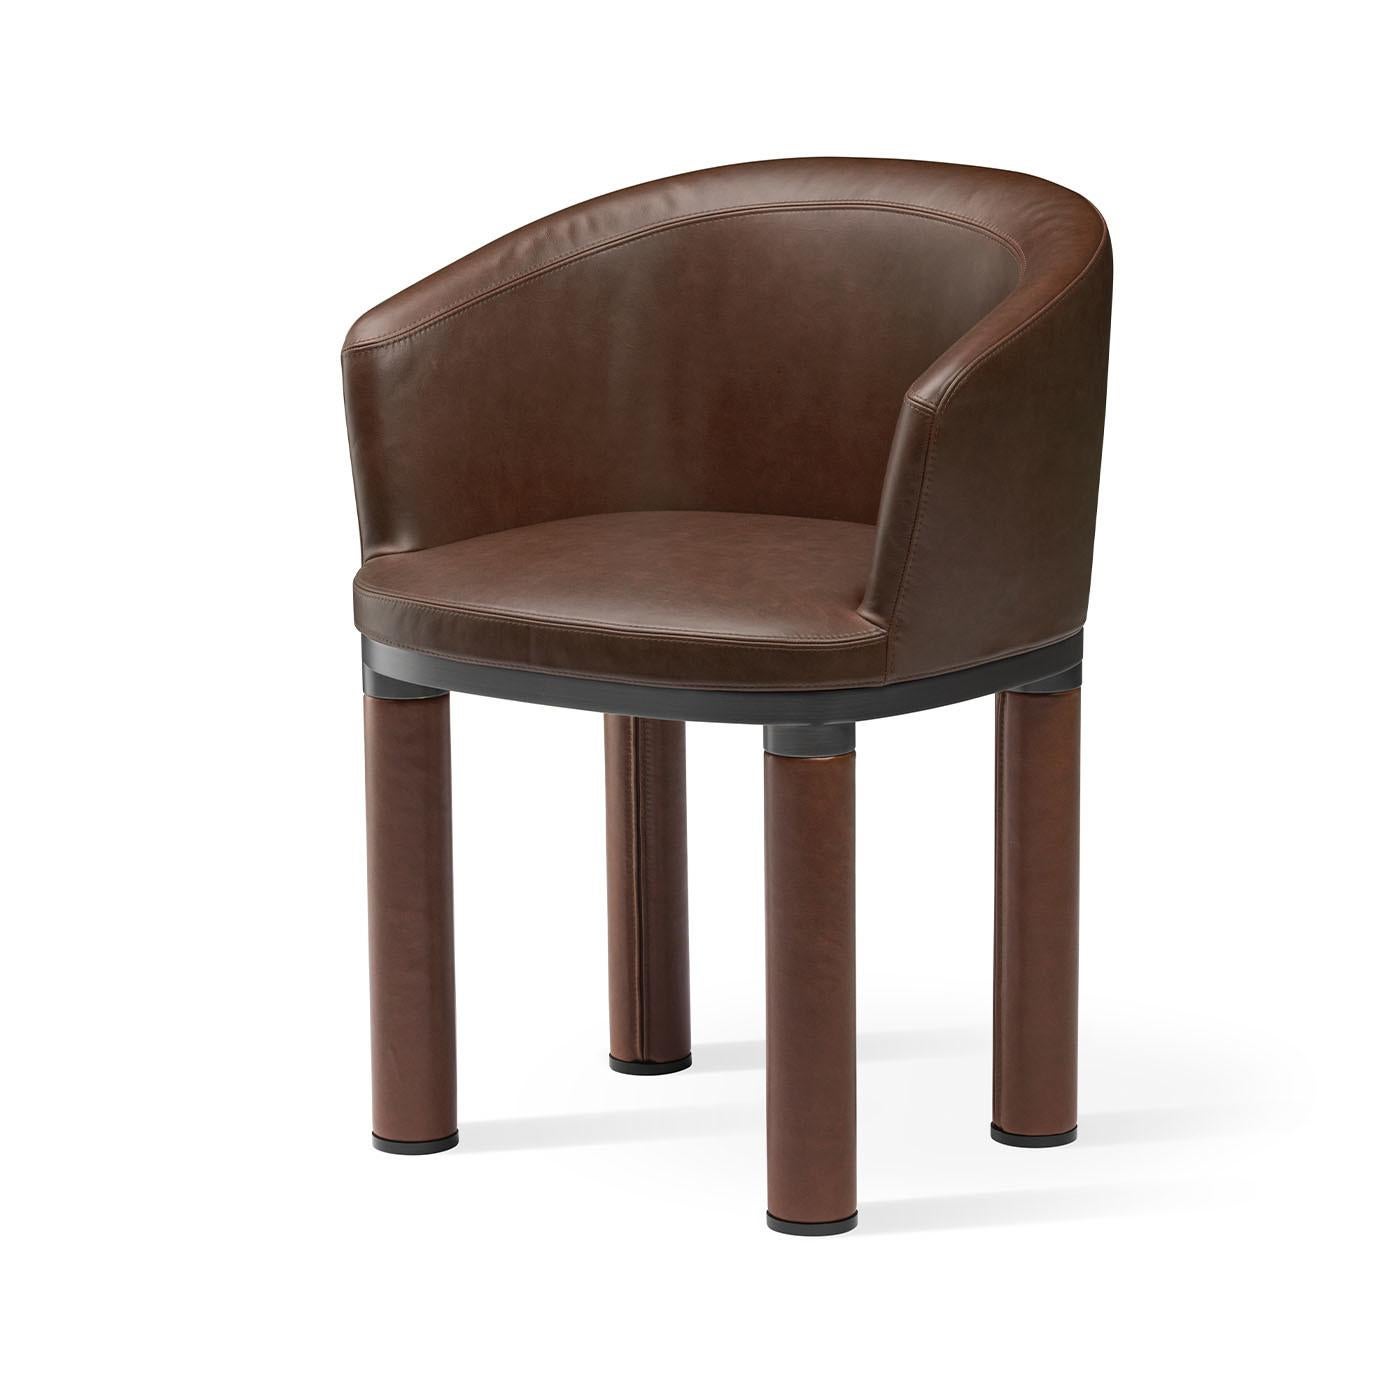 A superb addition to both modern and traditional decors, this armchair flaunts a charming and stylish design inspired by balanced proportions and classic silhouettes. Almost entirely upholstered in dark-brown leather, its sinuous and welcoming shape